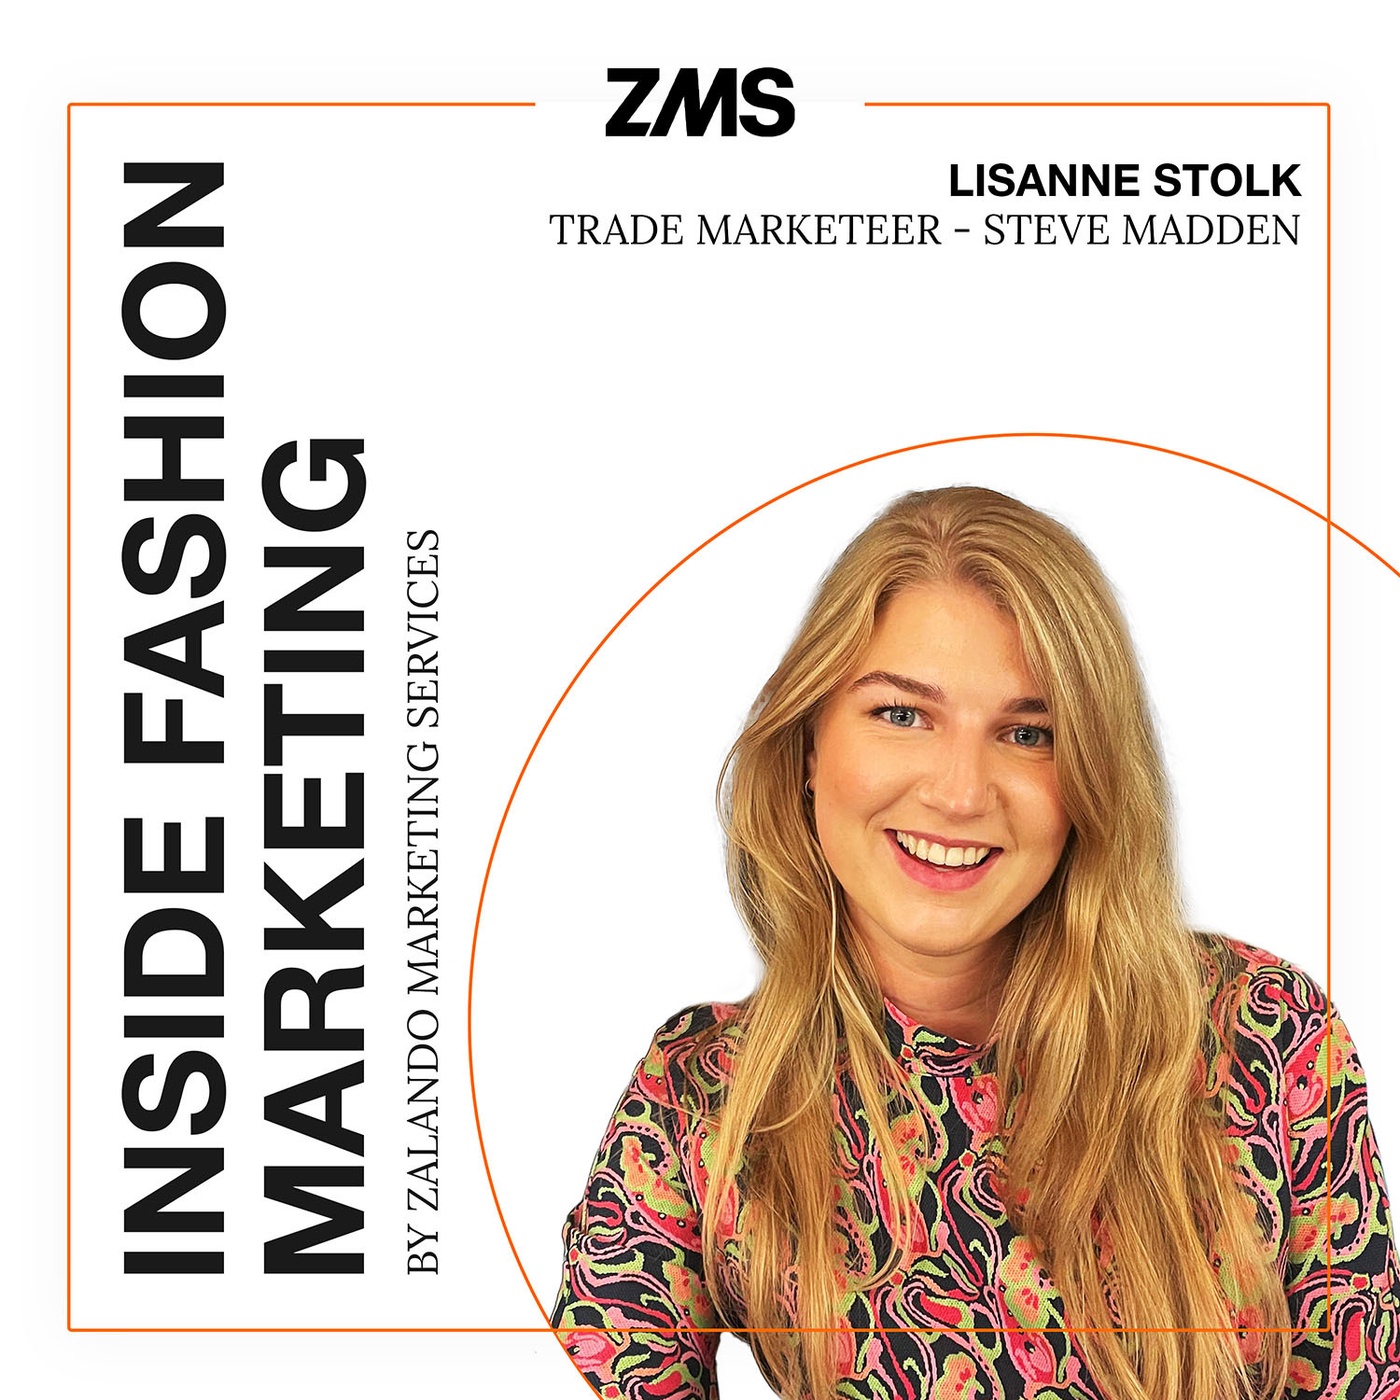 #38 11.9M social media reach without booked deliverables - how to influencer event with Steve Madden